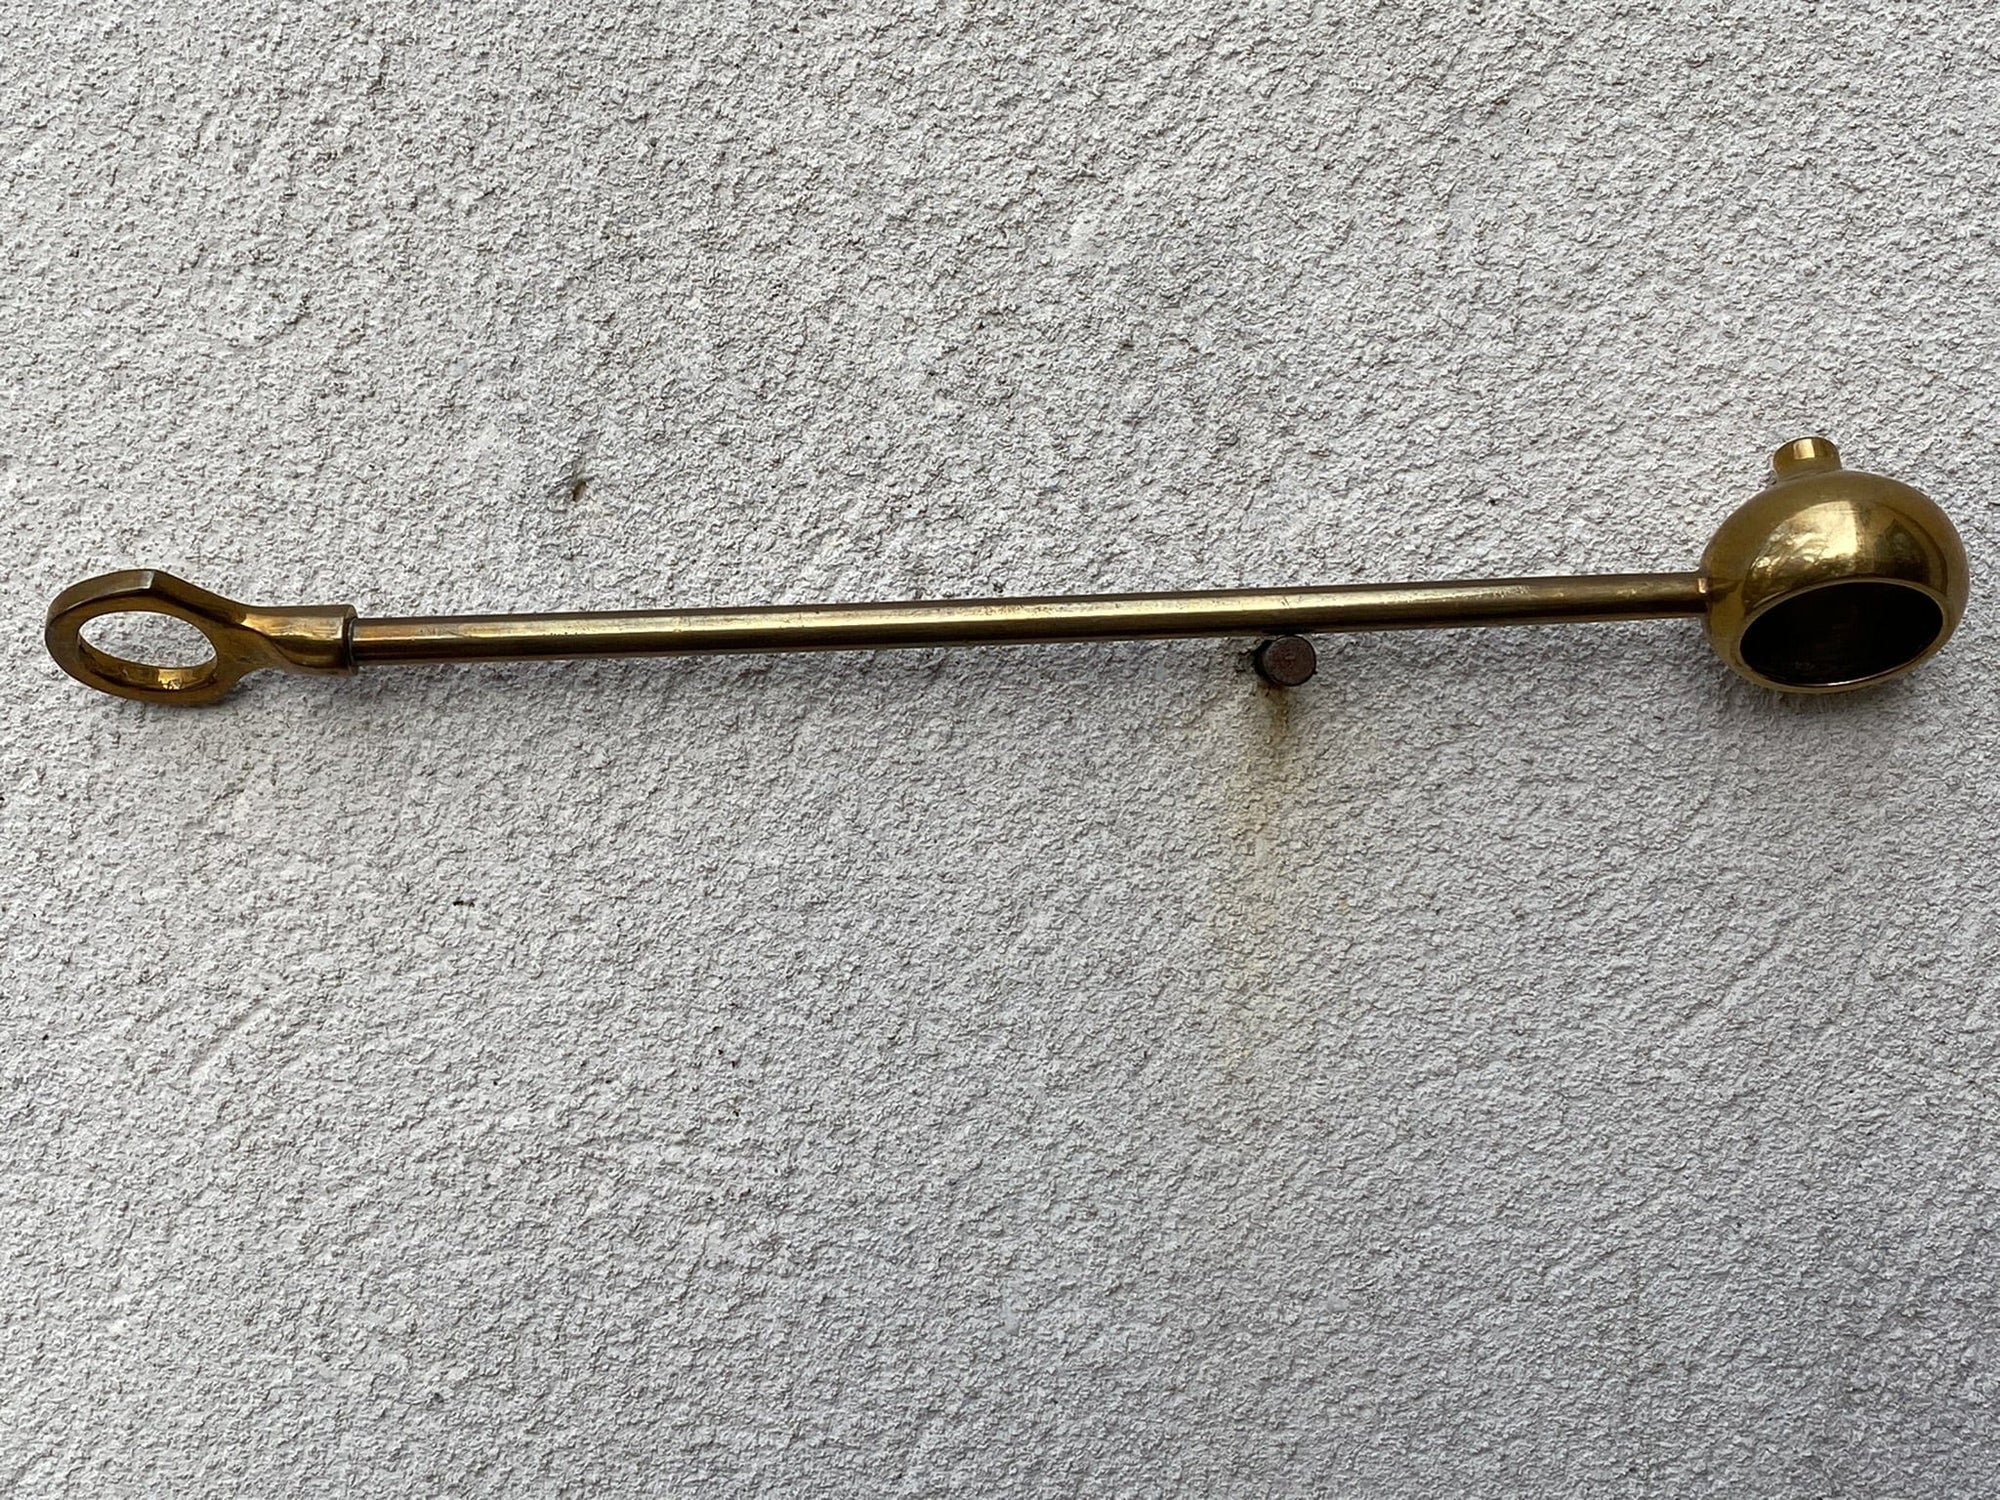 I Like Mike's Mid Century Modern Candle Snuffers Solid Brass Candle Snuffer with 9" Reach